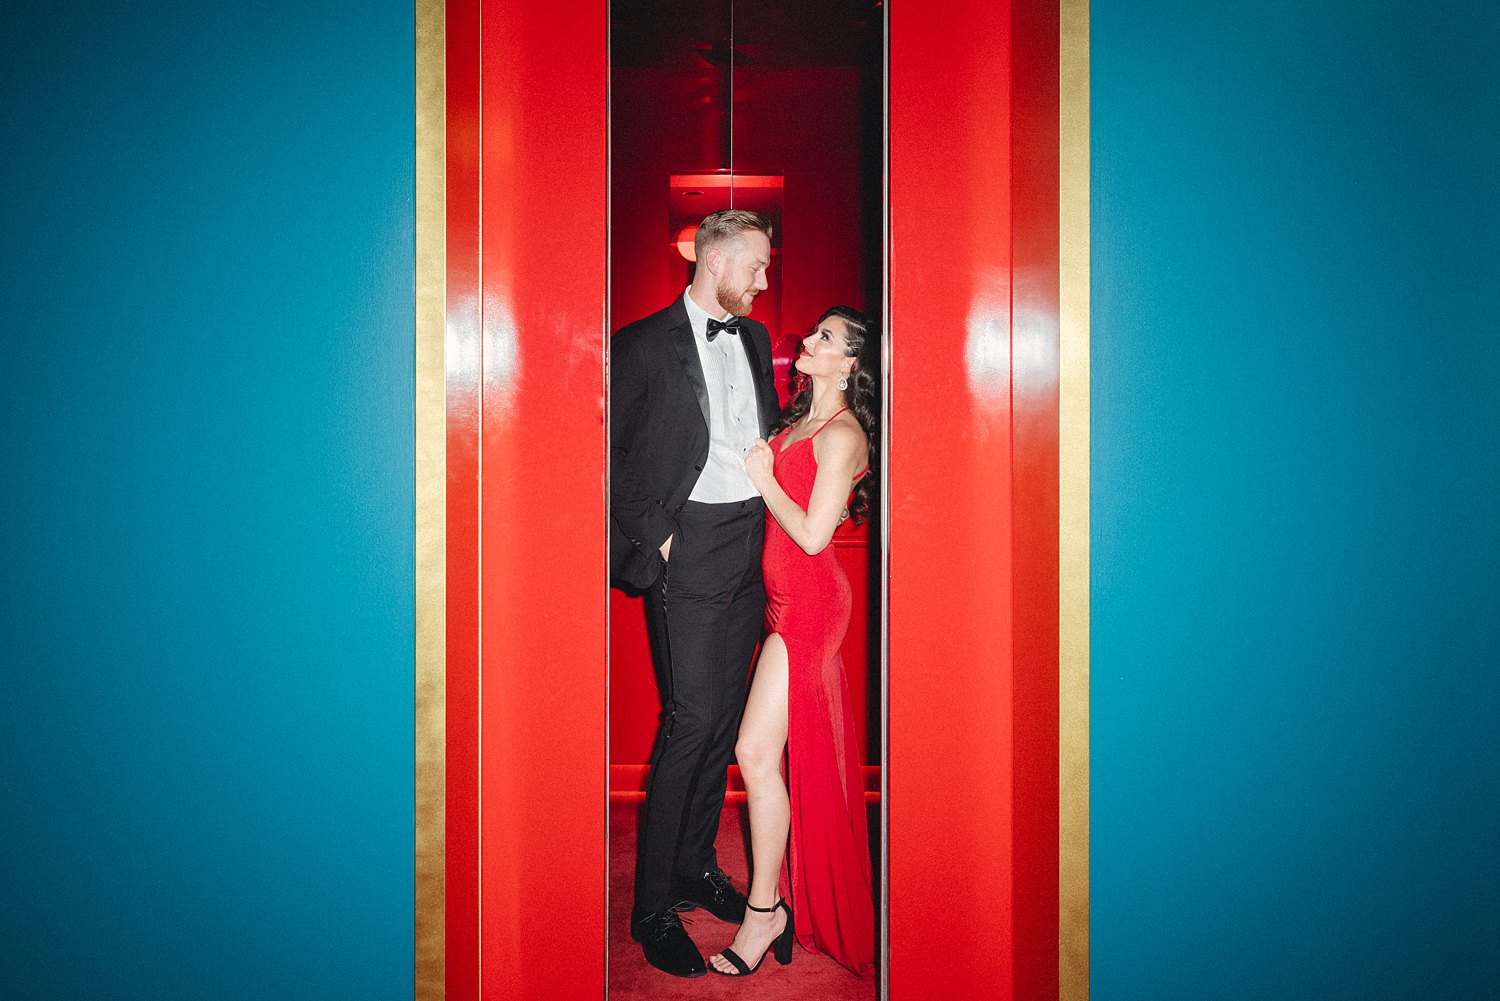 Woman in Dress and man in black tuxedo standing together in Virgin Hotel red elevator Engagement